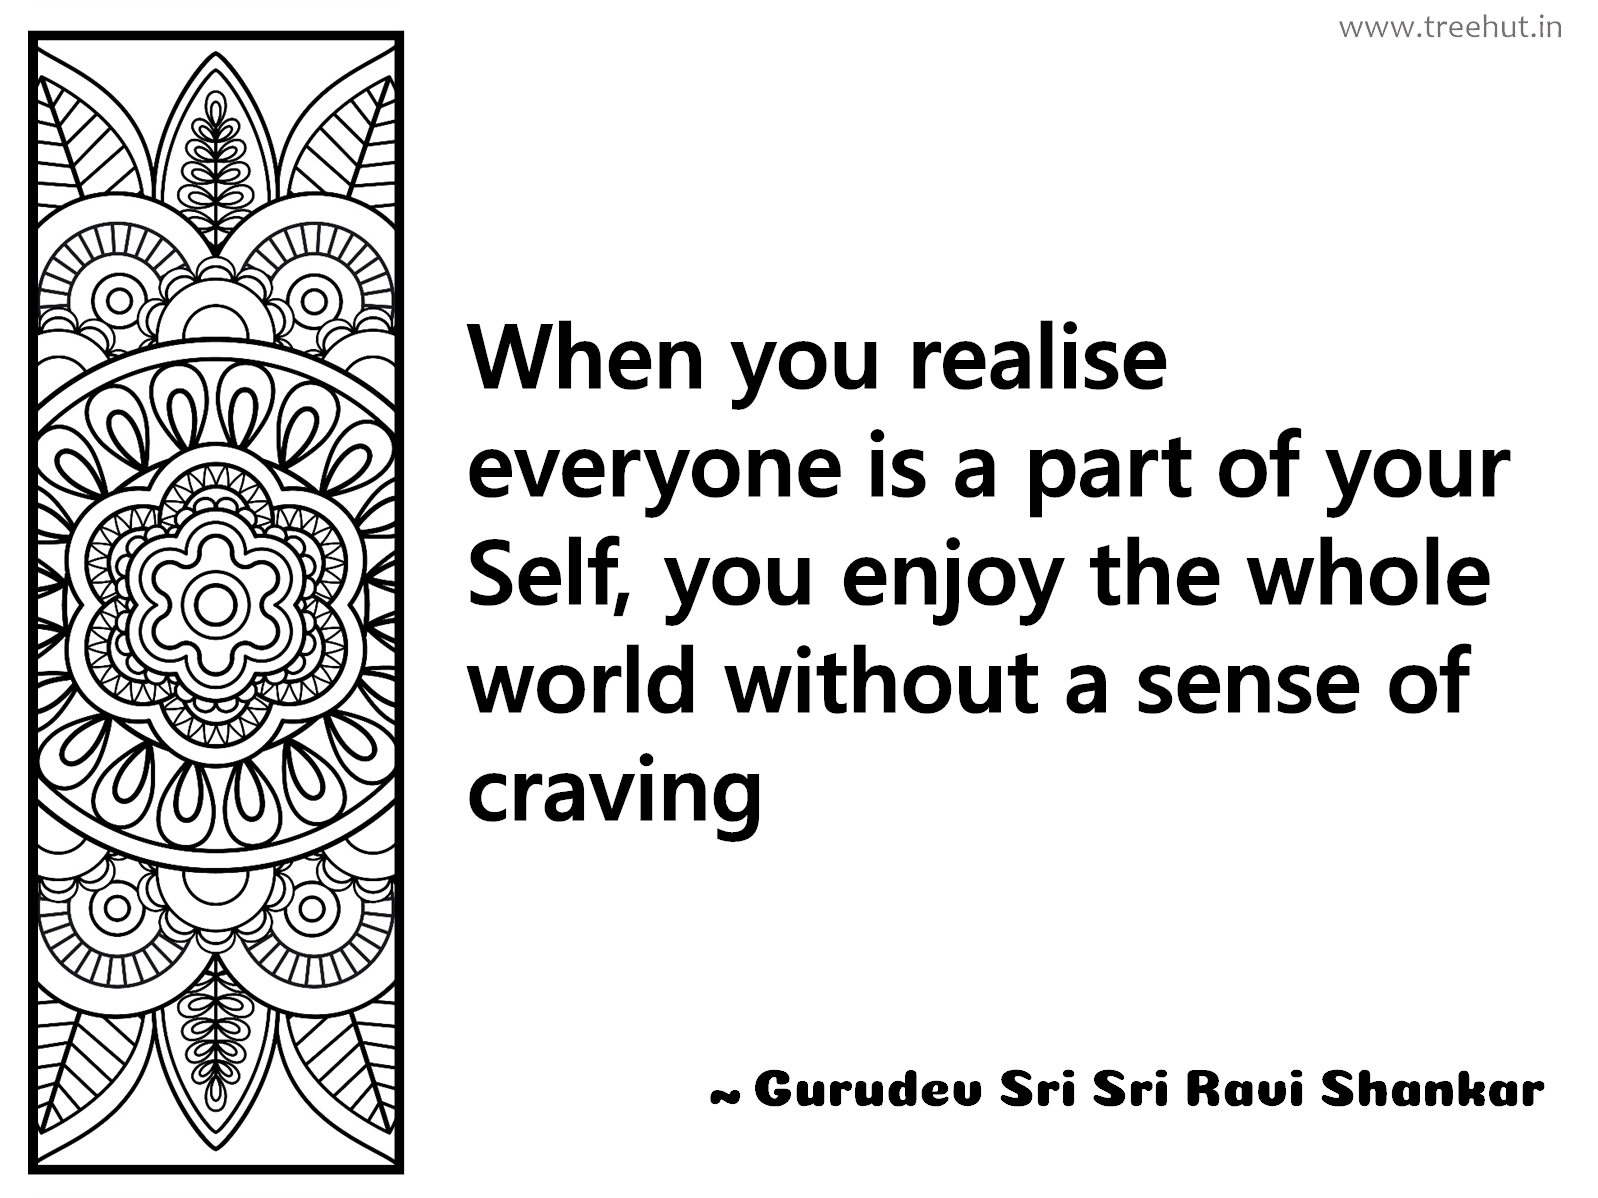 When you realise everyone is a part of your Self, you enjoy the whole world without a sense of craving Inspirational Quote by Gurudev Sri Sri Ravi Shankar, coloring pages